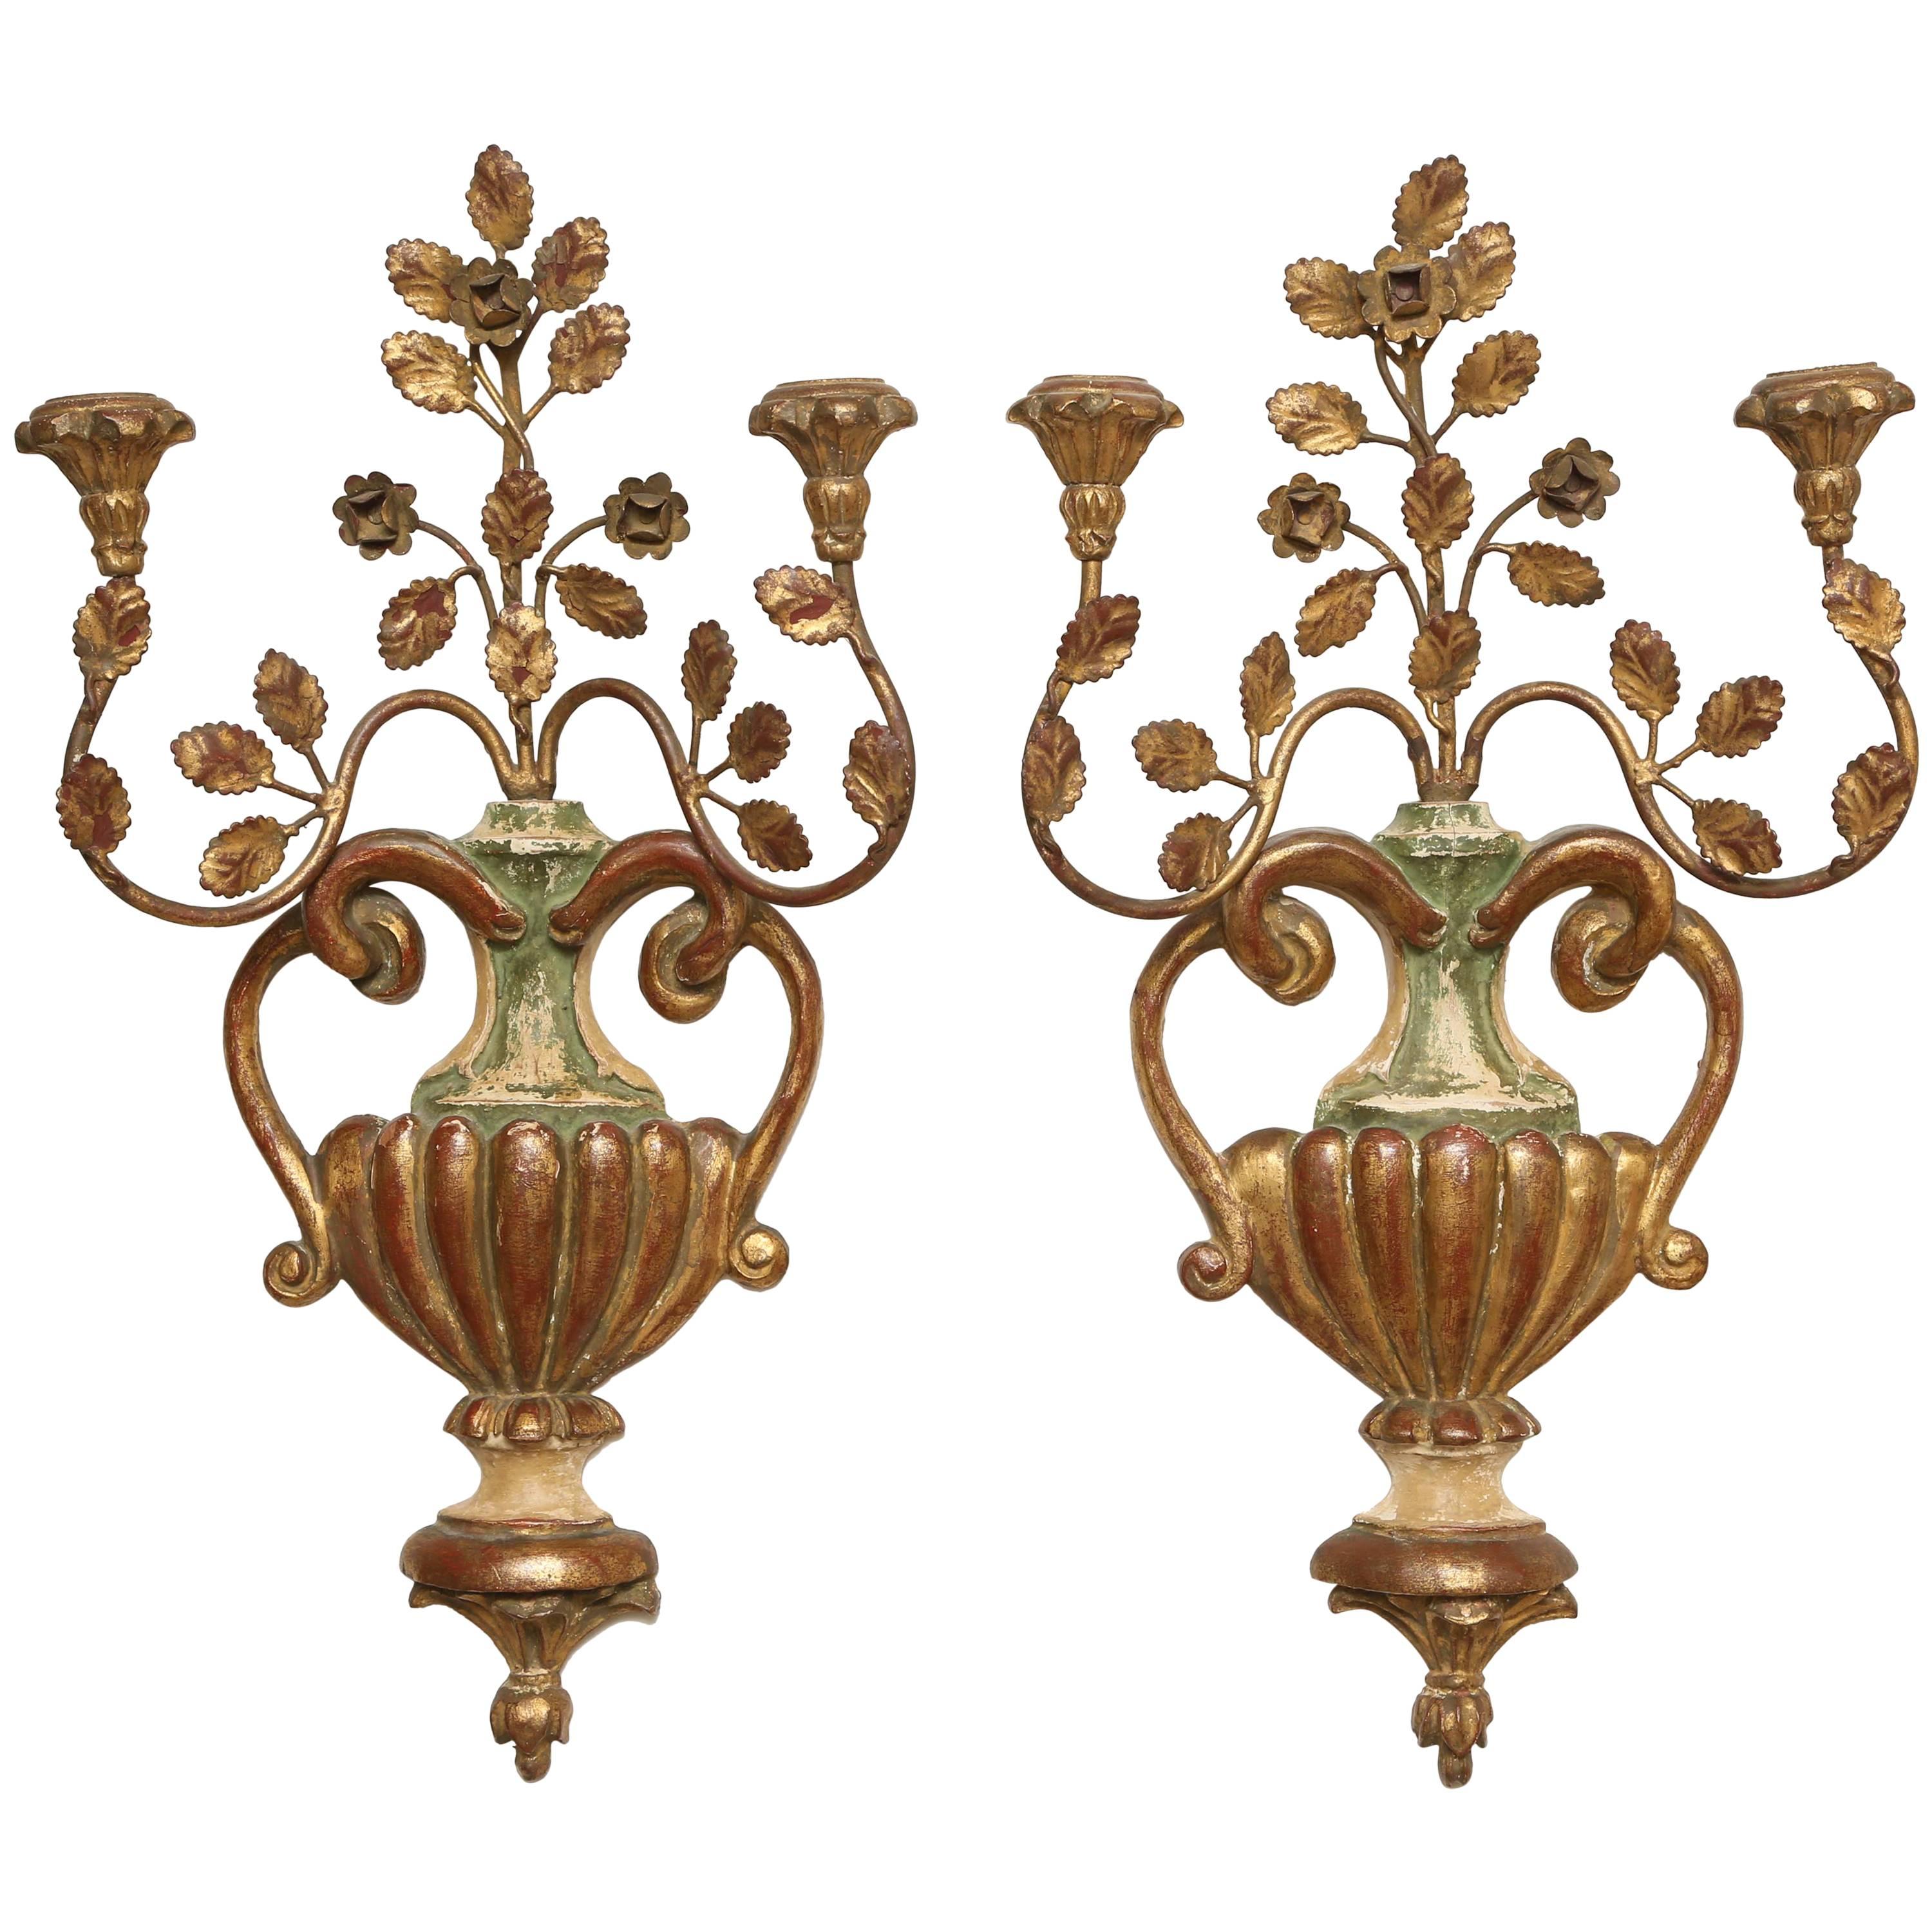 Pair of Palladio Giltwood and Metal Urn Shape Sconces